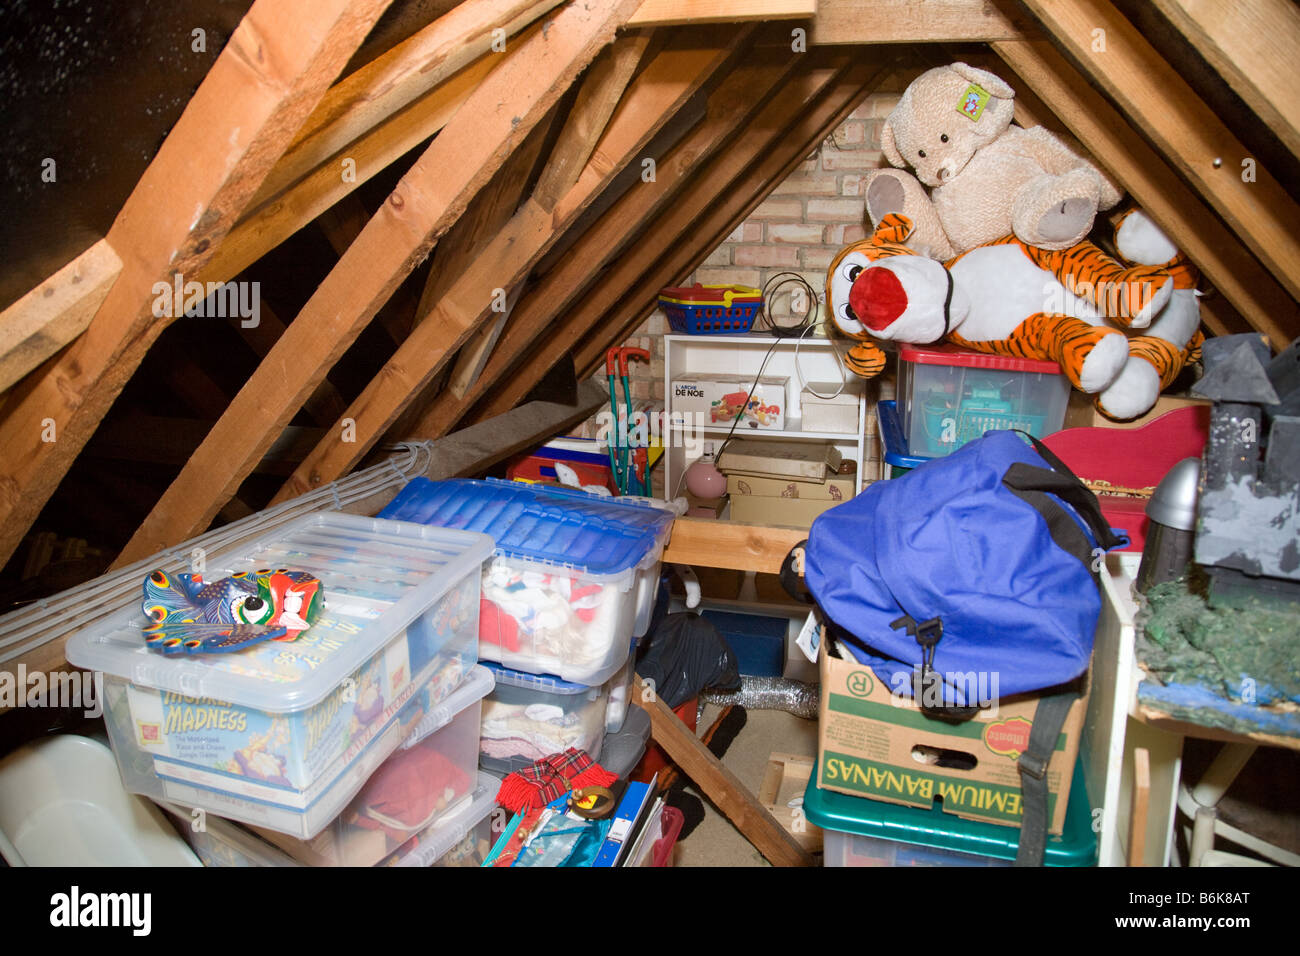 An attic or loft full of old junk and toys, UK Stock Photo